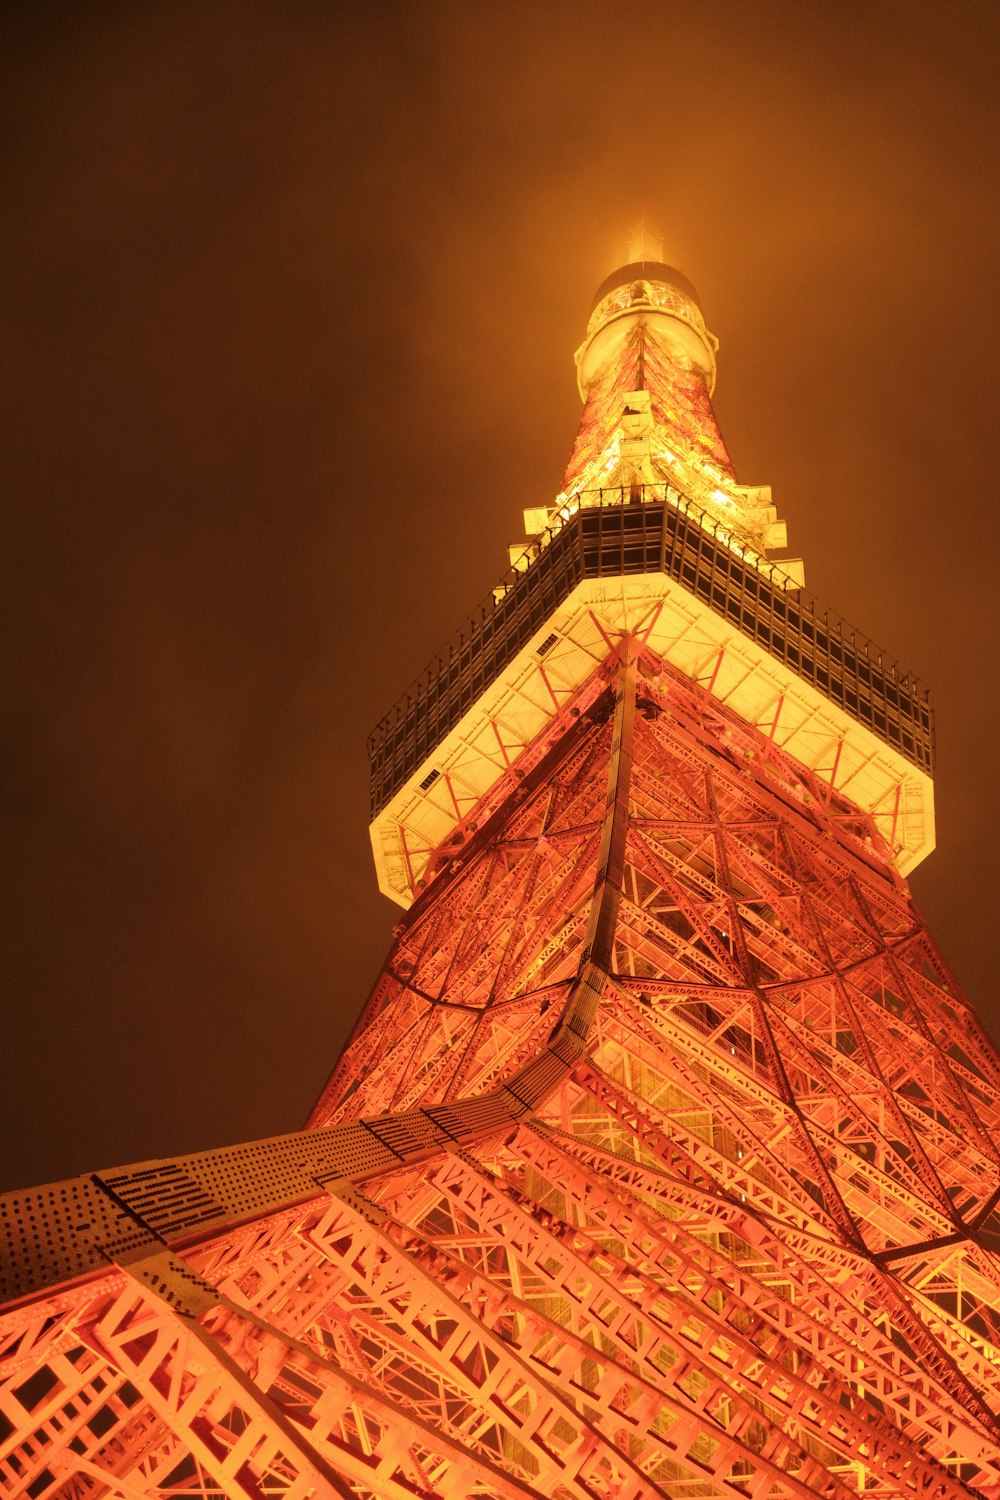 the Tokyo tower is lit up at night